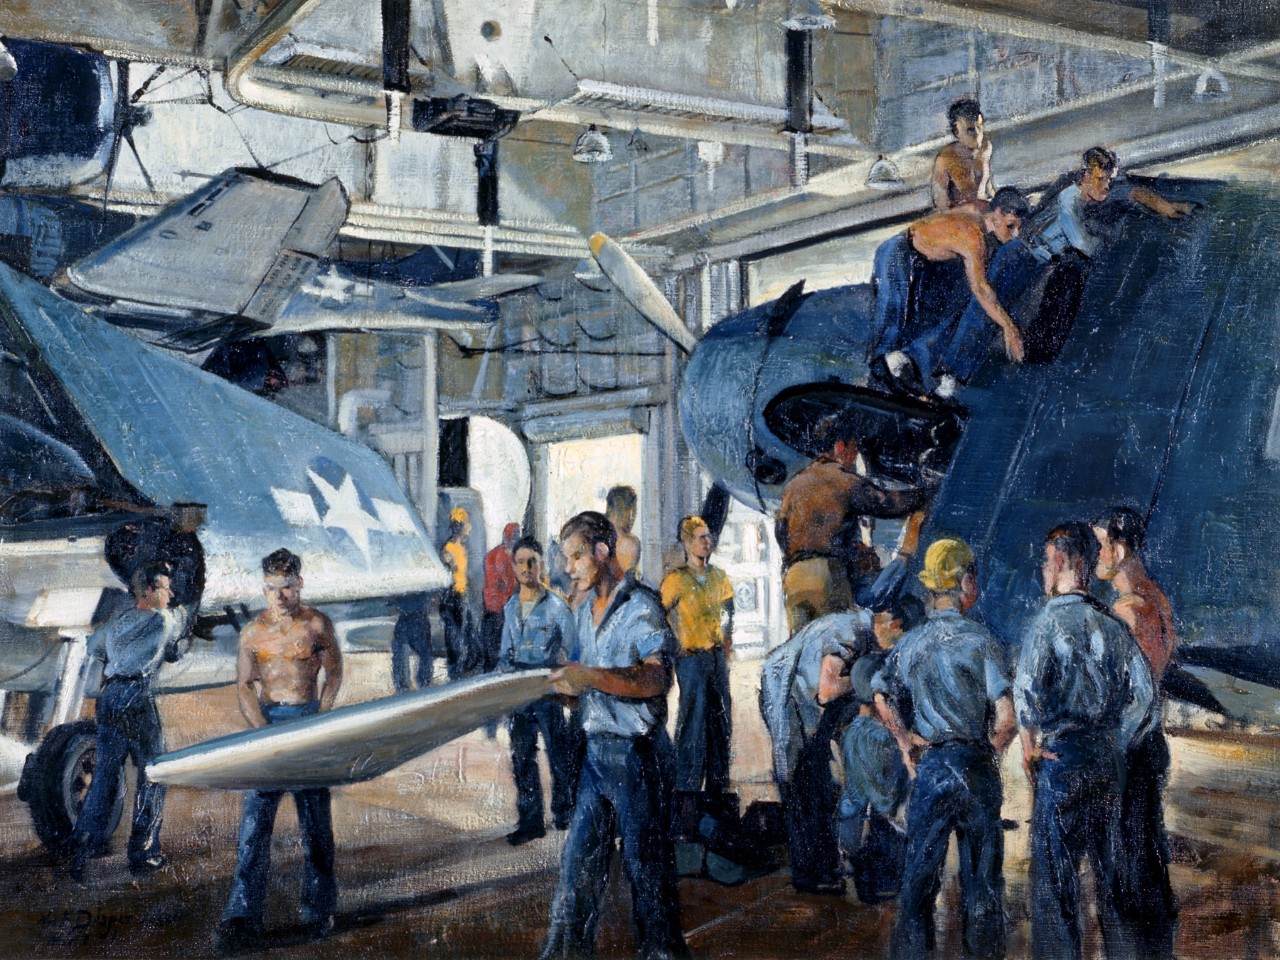 Sailors work on aircraft in the hanger of an aircraft carrier